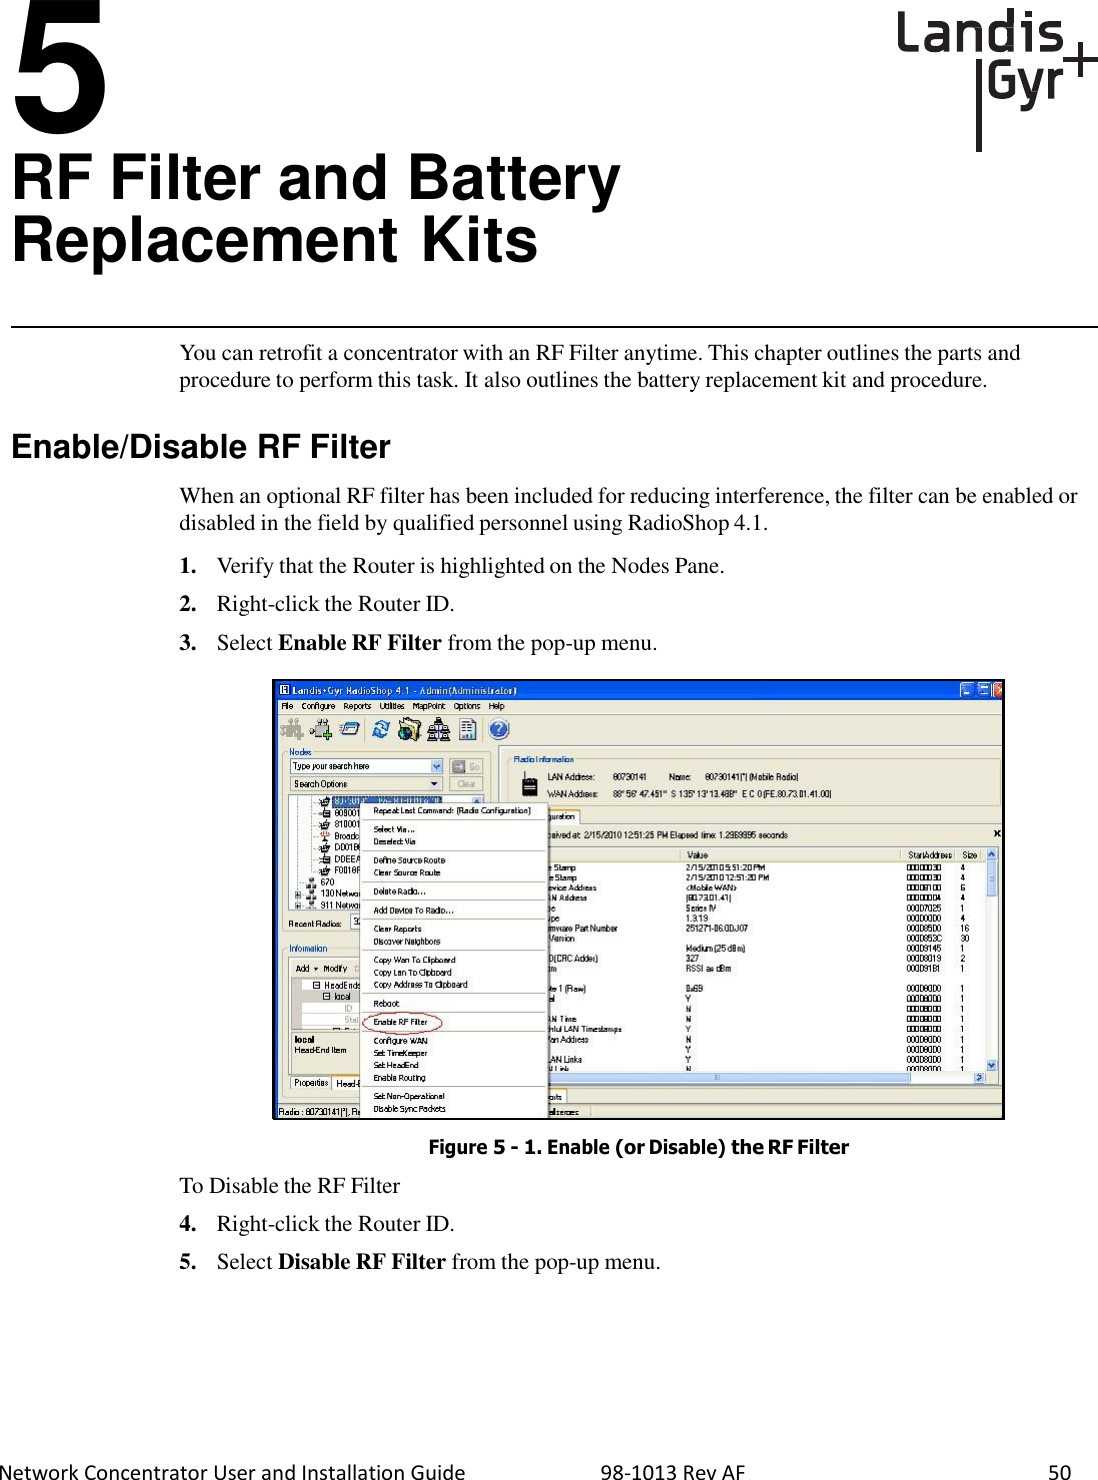  Network Concentrator User and Installation Guide                          98-1013 Rev AF    50    5 RF Filter and Battery Replacement Kits    You can retrofit a concentrator with an RF Filter anytime. This chapter outlines the parts and procedure to perform this task. It also outlines the battery replacement kit and procedure.   Enable/Disable RF Filter  When an optional RF filter has been included for reducing interference, the filter can be enabled or disabled in the field by qualified personnel using RadioShop 4.1.  1.   Verify that the Router is highlighted on the Nodes Pane.  2.   Right-click the Router ID.  3.   Select Enable RF Filter from the pop-up menu.                          To Disable the RF Filter Figure 5 - 1. Enable (or Disable) the RF Filter  4.   Right-click the Router ID.  5.   Select Disable RF Filter from the pop-up menu. 